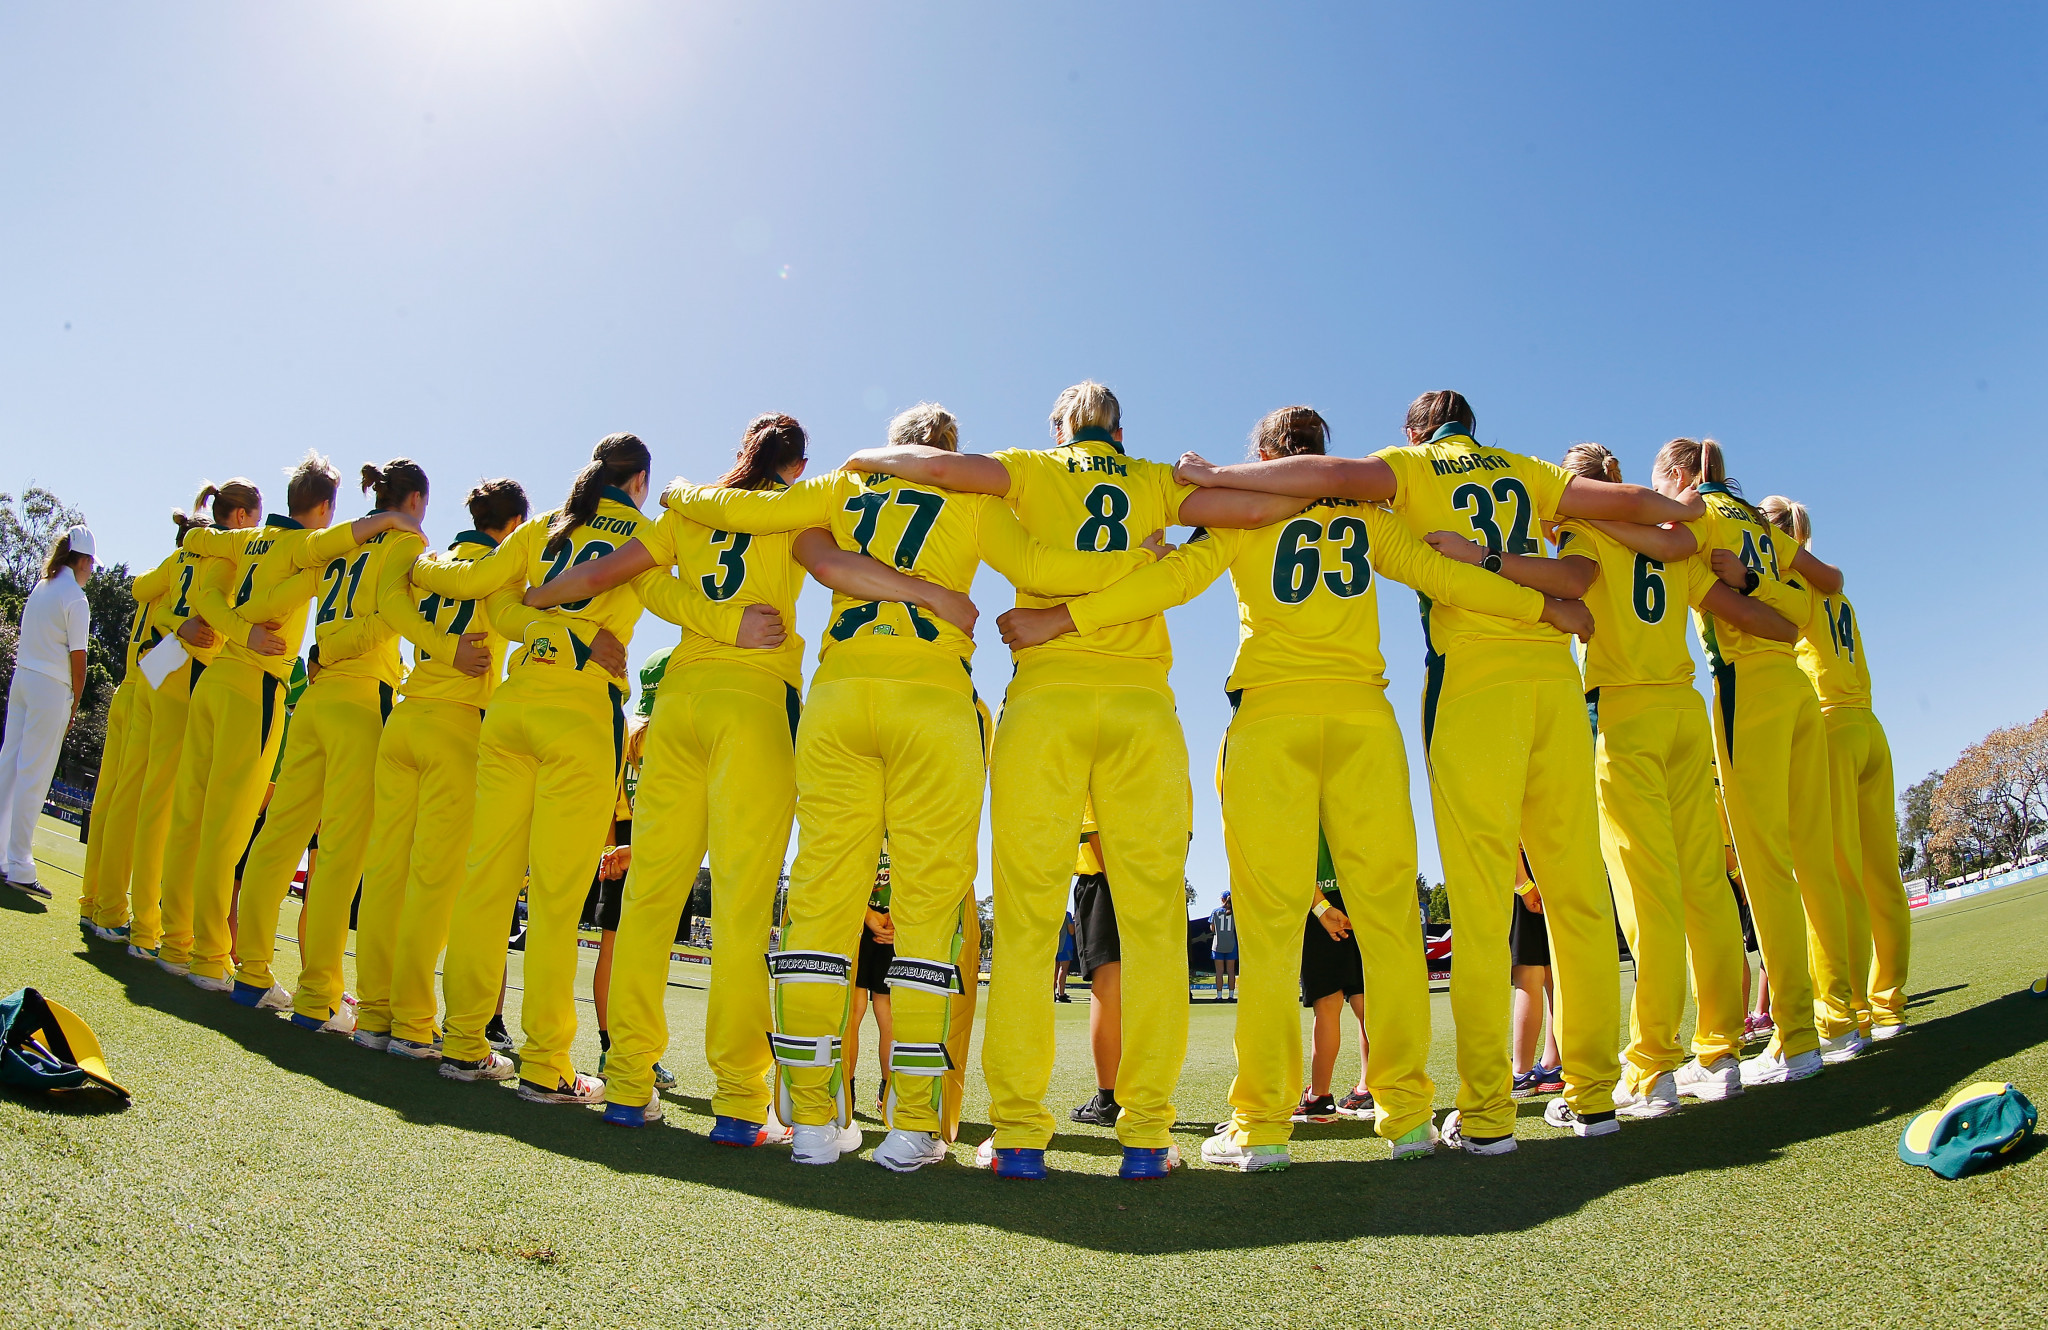 National governing bodies such as Cricket Australia are under pressure from both sides of the debate ©Getty Images